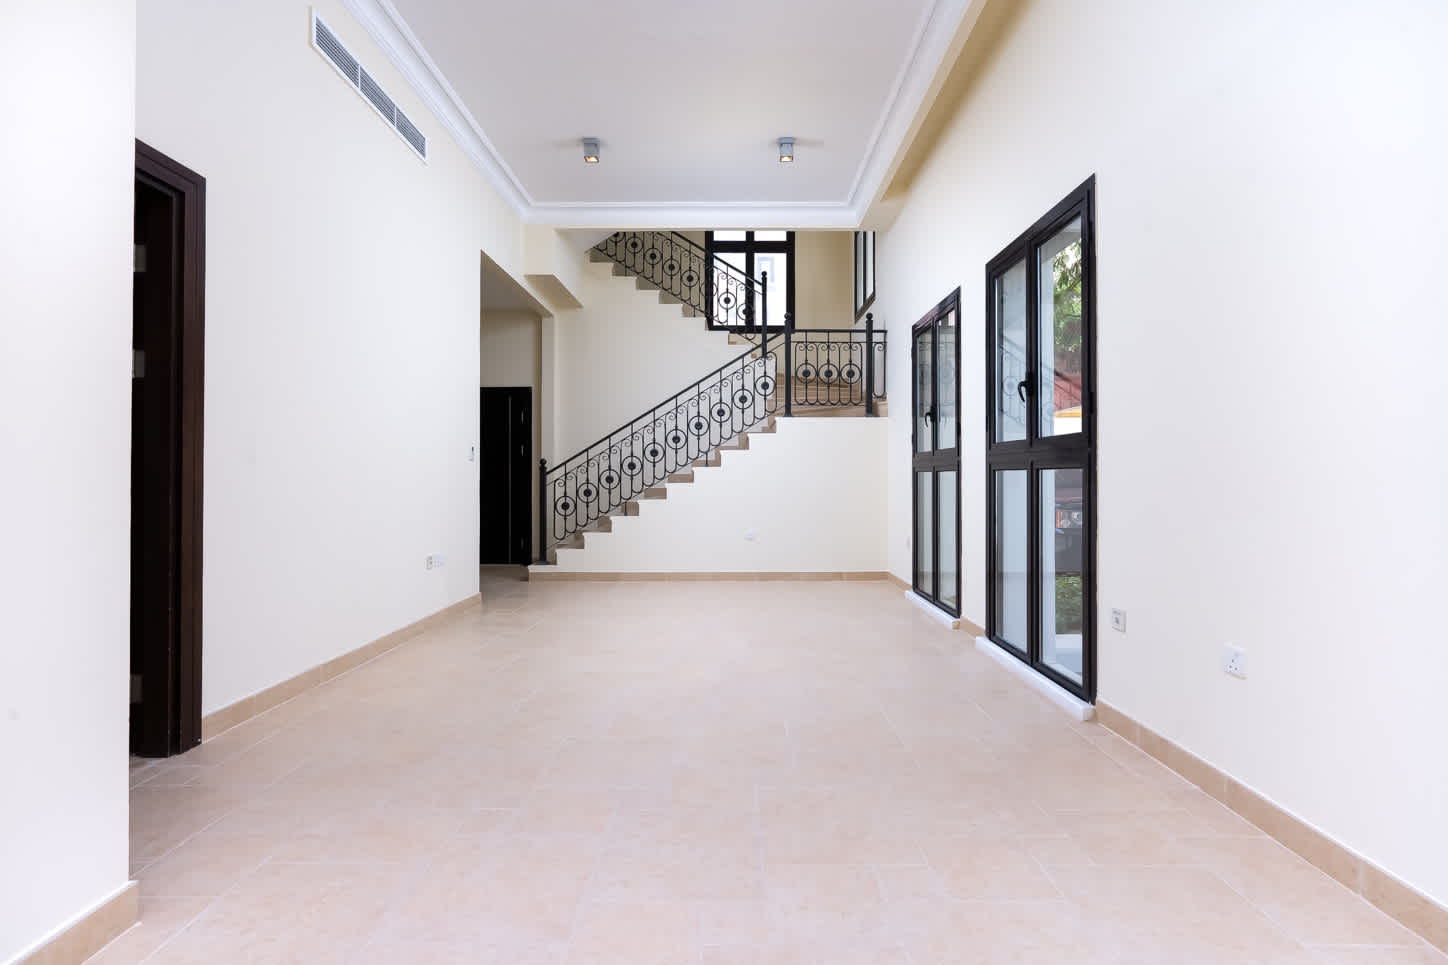 25 Spaces Real Estate - Qanat Quartier - Properties for Rent - 15th of MAY 2022 (ref THS2525)2